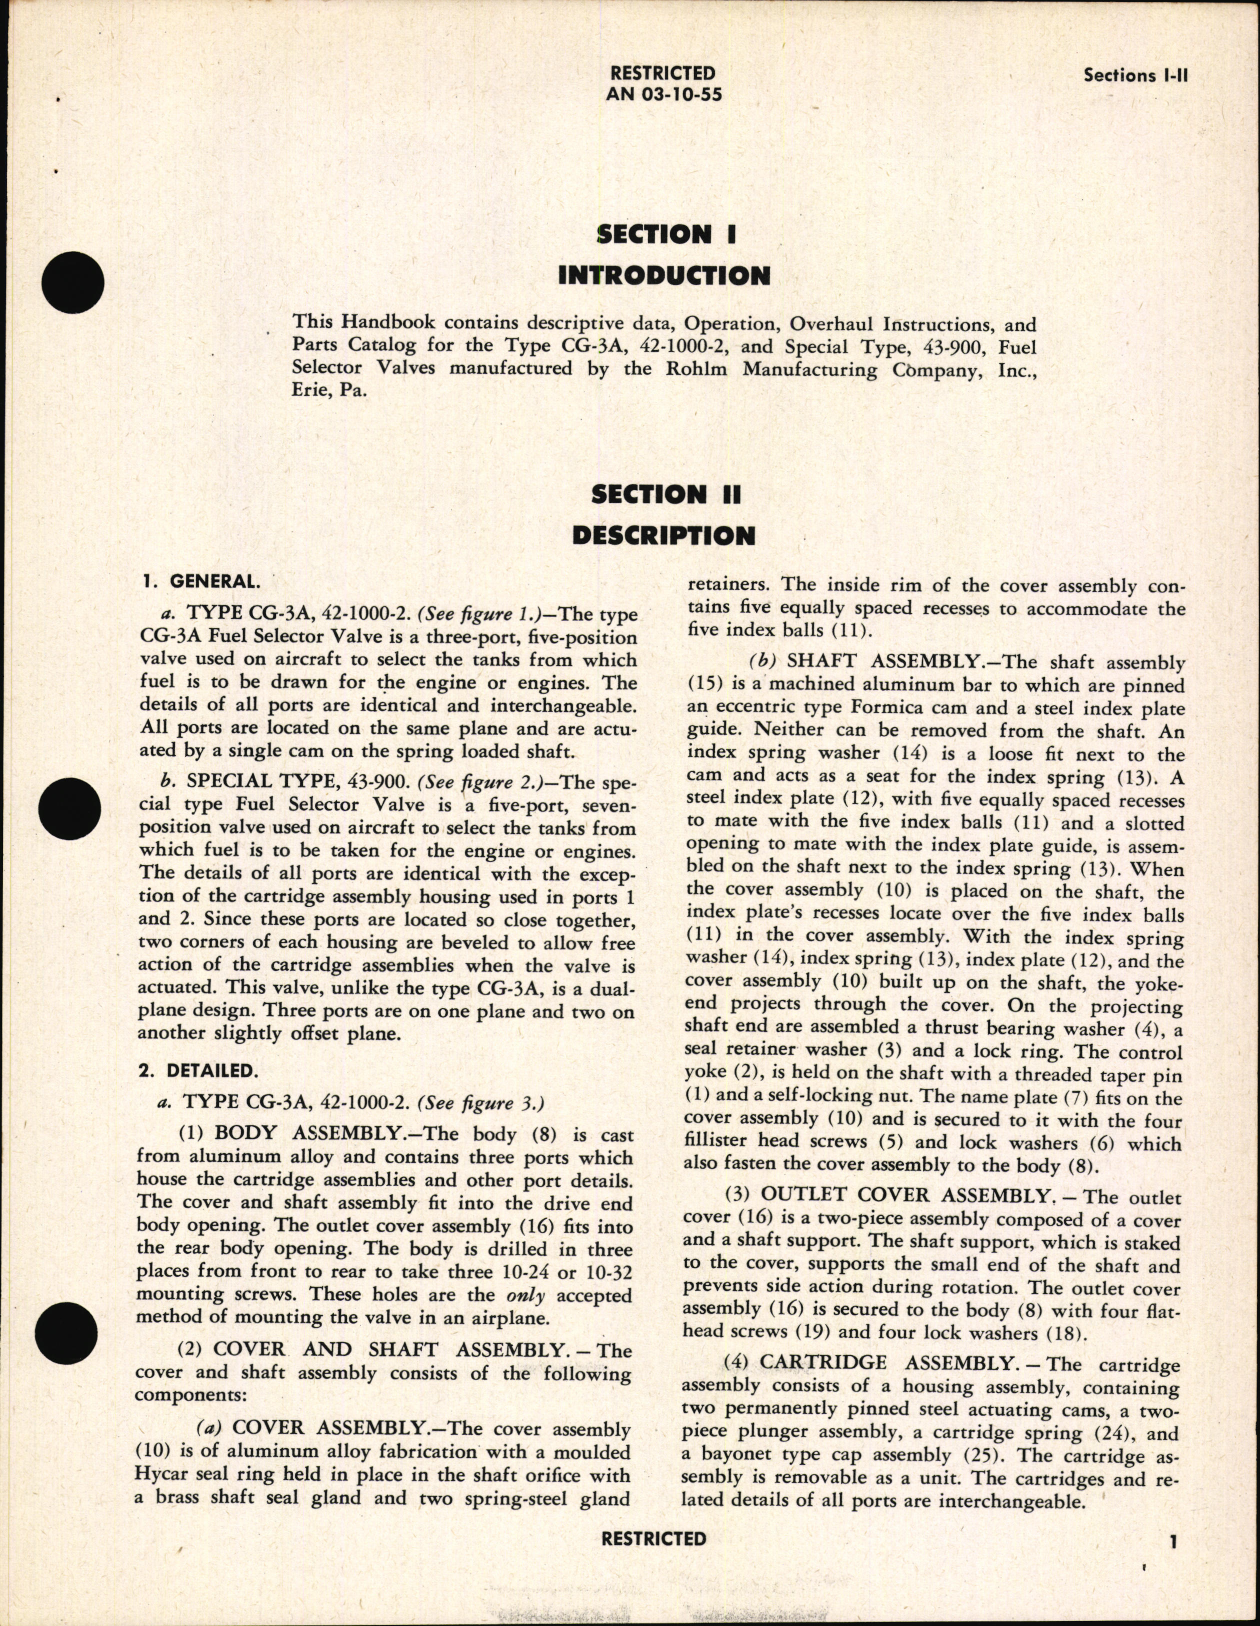 Sample page 5 from AirCorps Library document: Overhaul Instructions with Parts Catalog for Type CG-3A (42-1000-2) and Special Type 43-900 Fuel Selector Valves